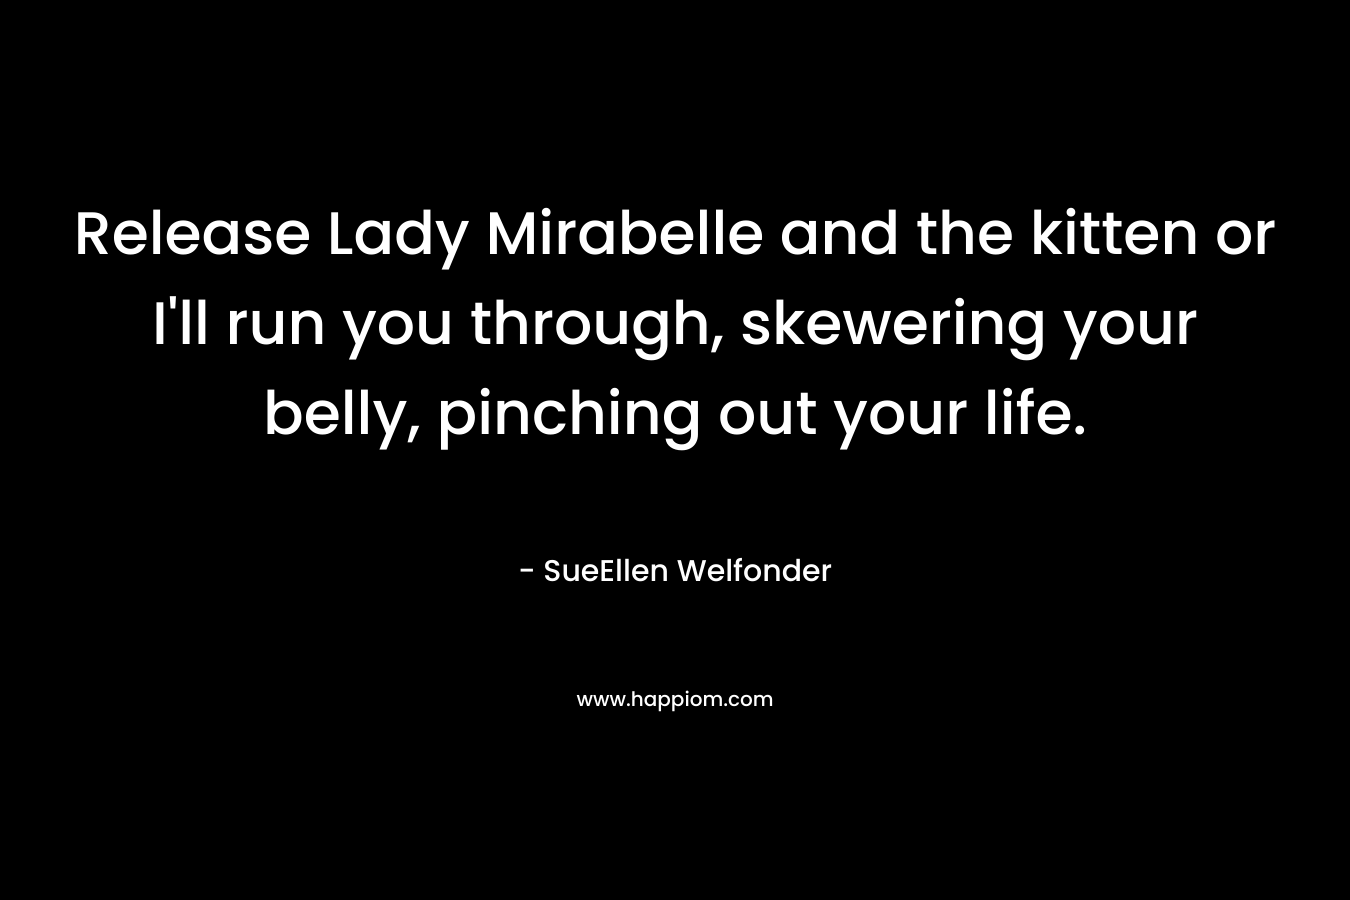 Release Lady Mirabelle and the kitten or I'll run you through, skewering your belly, pinching out your life.